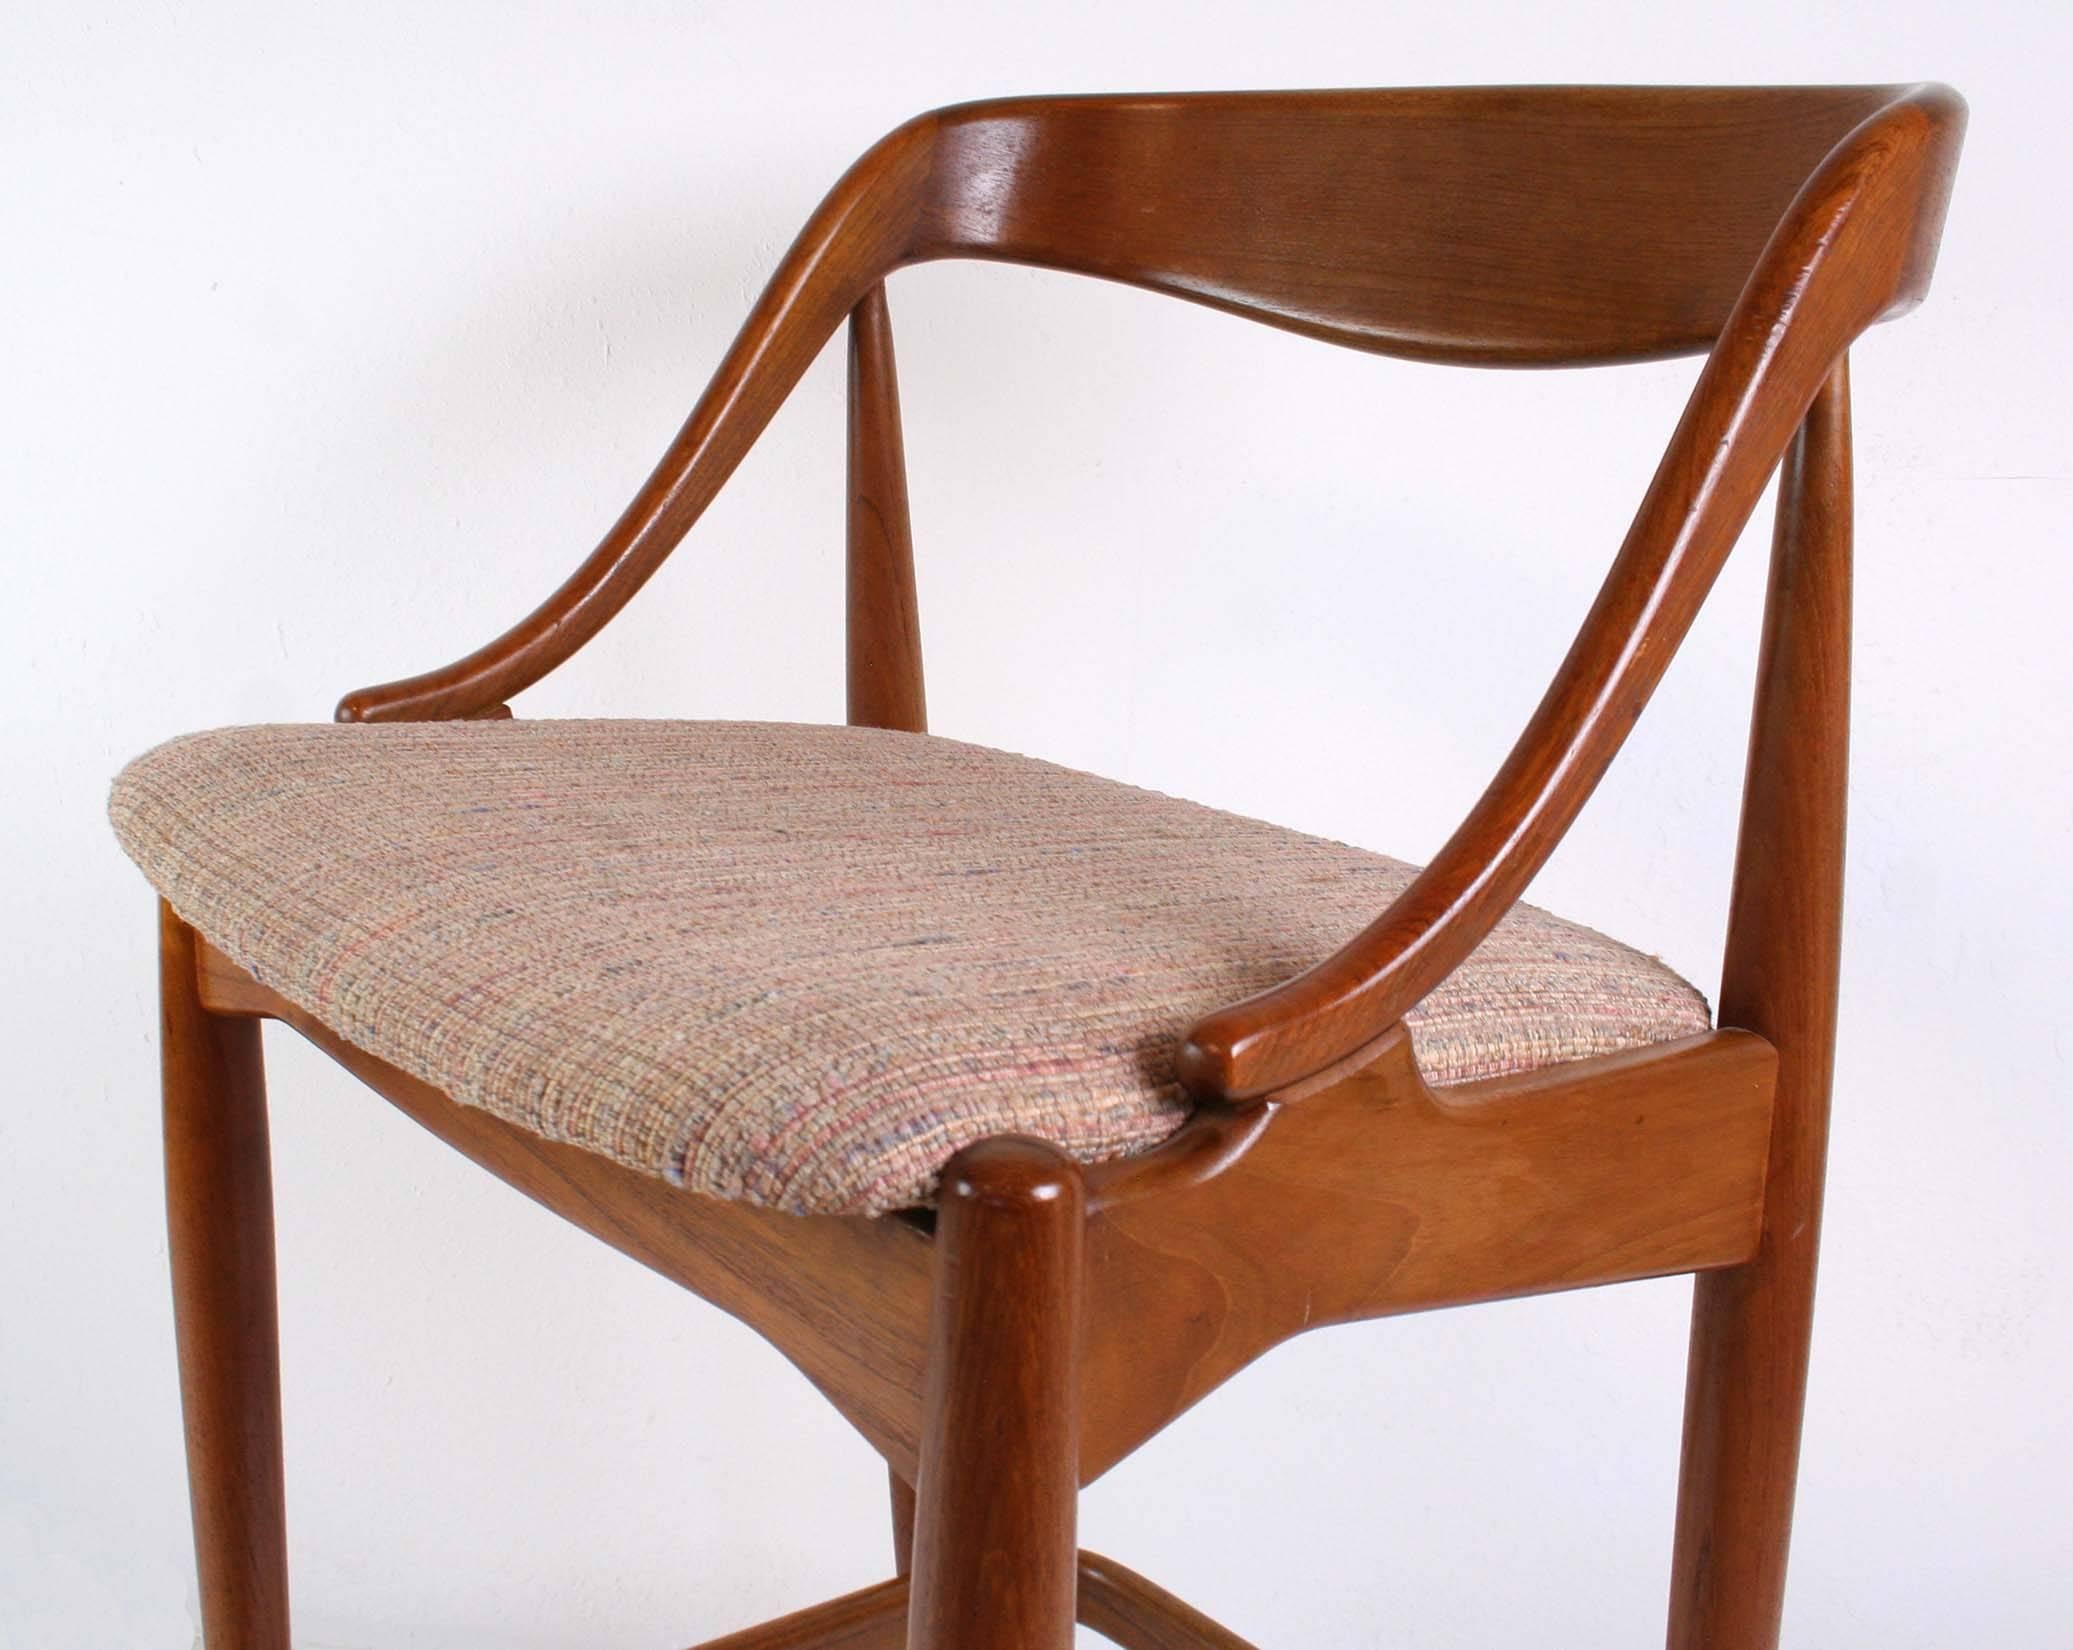 A set of three vintage Danish modern bar stools in oiled teak with a sculptural back similar in style to chairs by Niels Moller. Upholstered seats in good vintage as found condition.